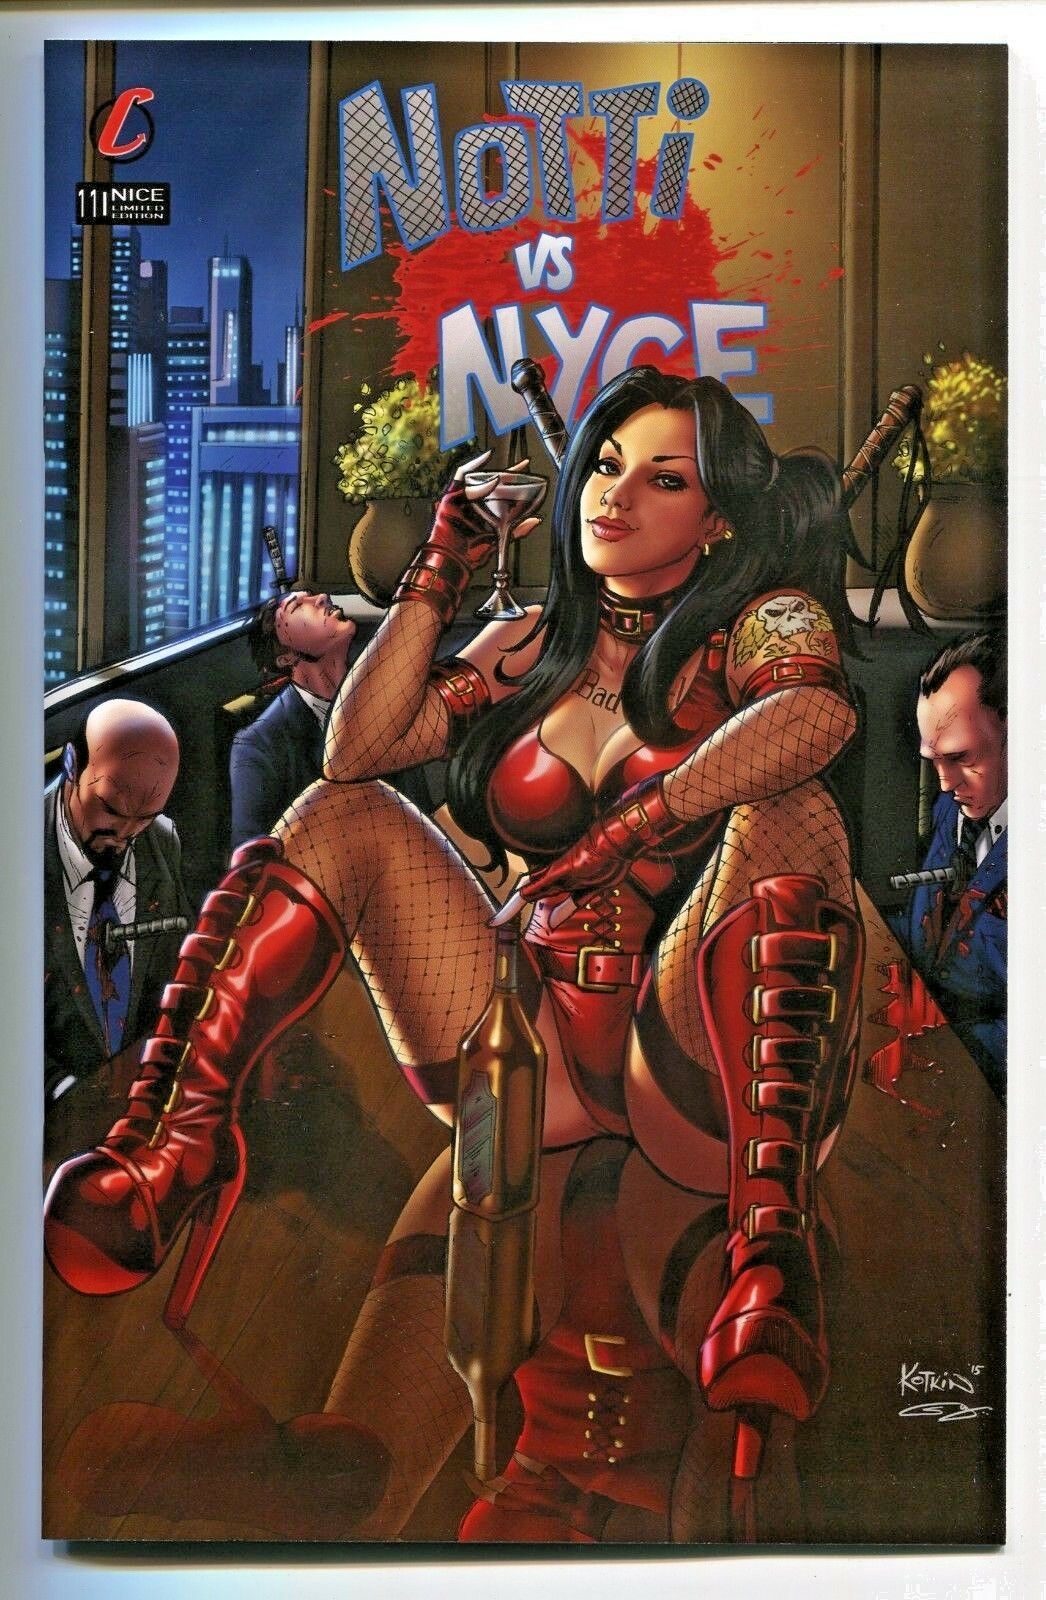 Notti & Nyce #11 Alex Kotkin NICE Variant Cover Counterpoint Comics SOLD OUT!